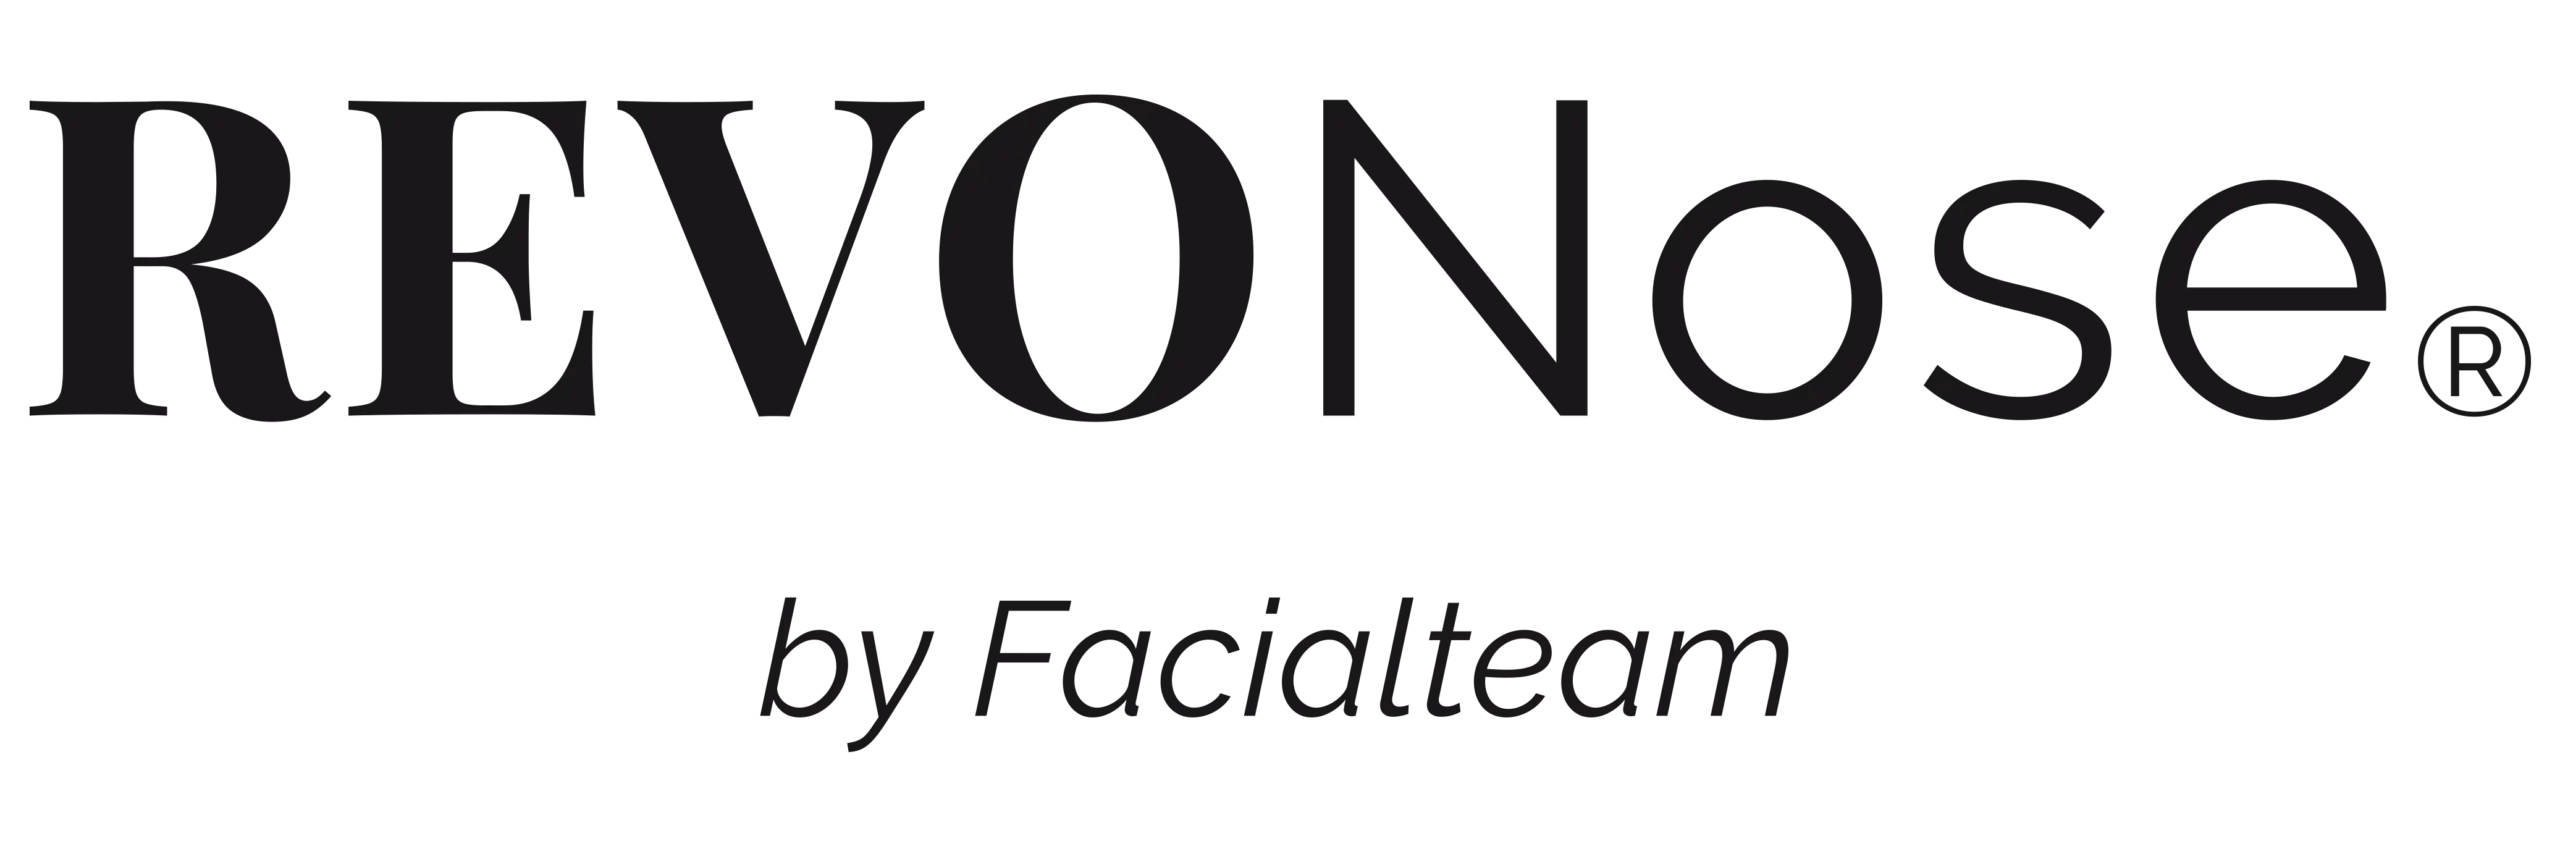 Logo of REVONose, a patented method by the Facialteam Group to perform high-end rhinoplasties with ultrasonic technology